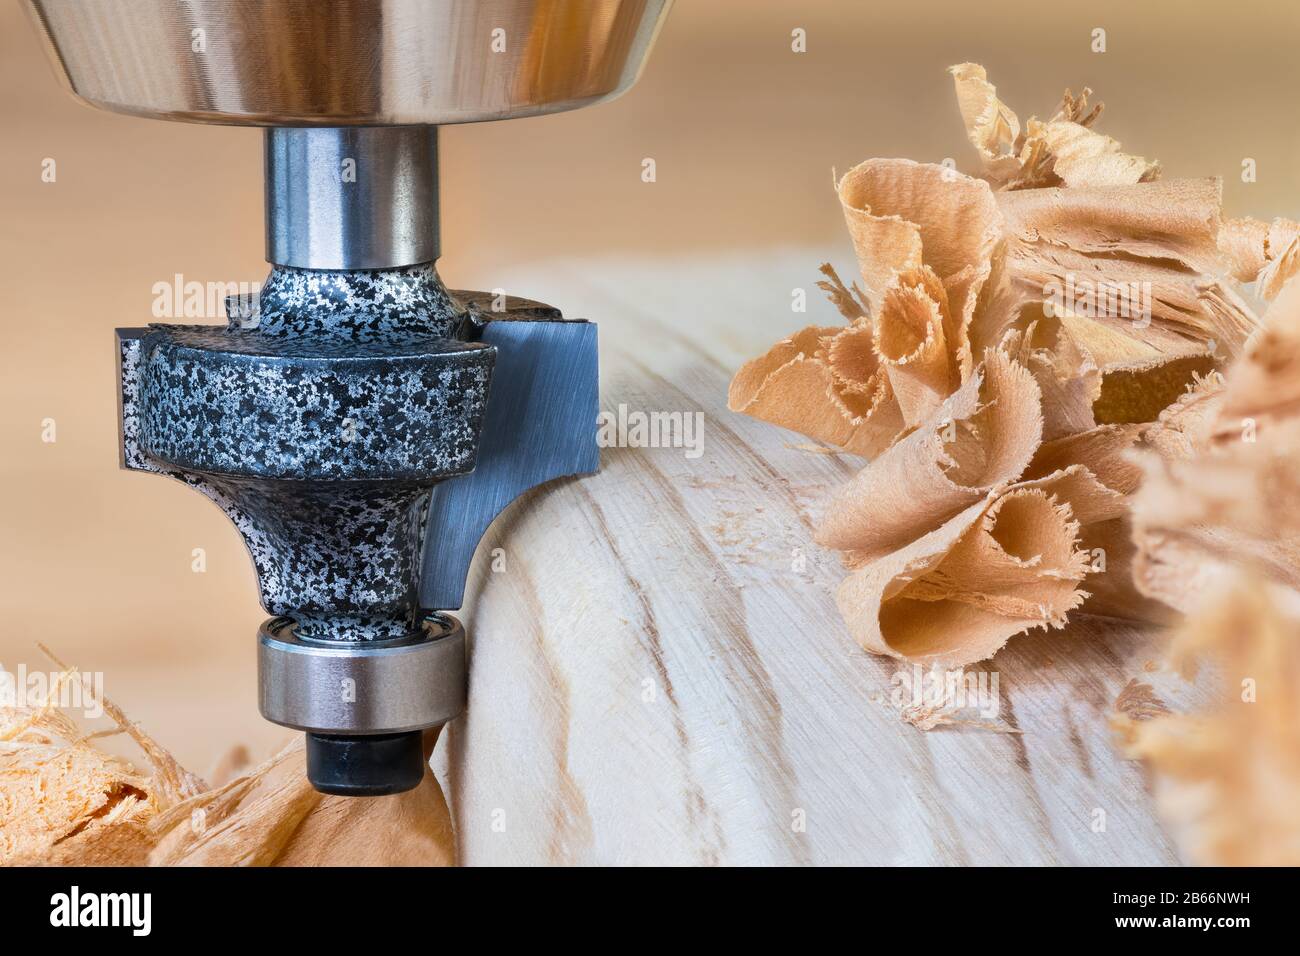 Shaping copying shank router bit clamped in chuck of a working machine tool. Sharp steel woodworking milling cutter with bearing forming edge on wood. Stock Photo